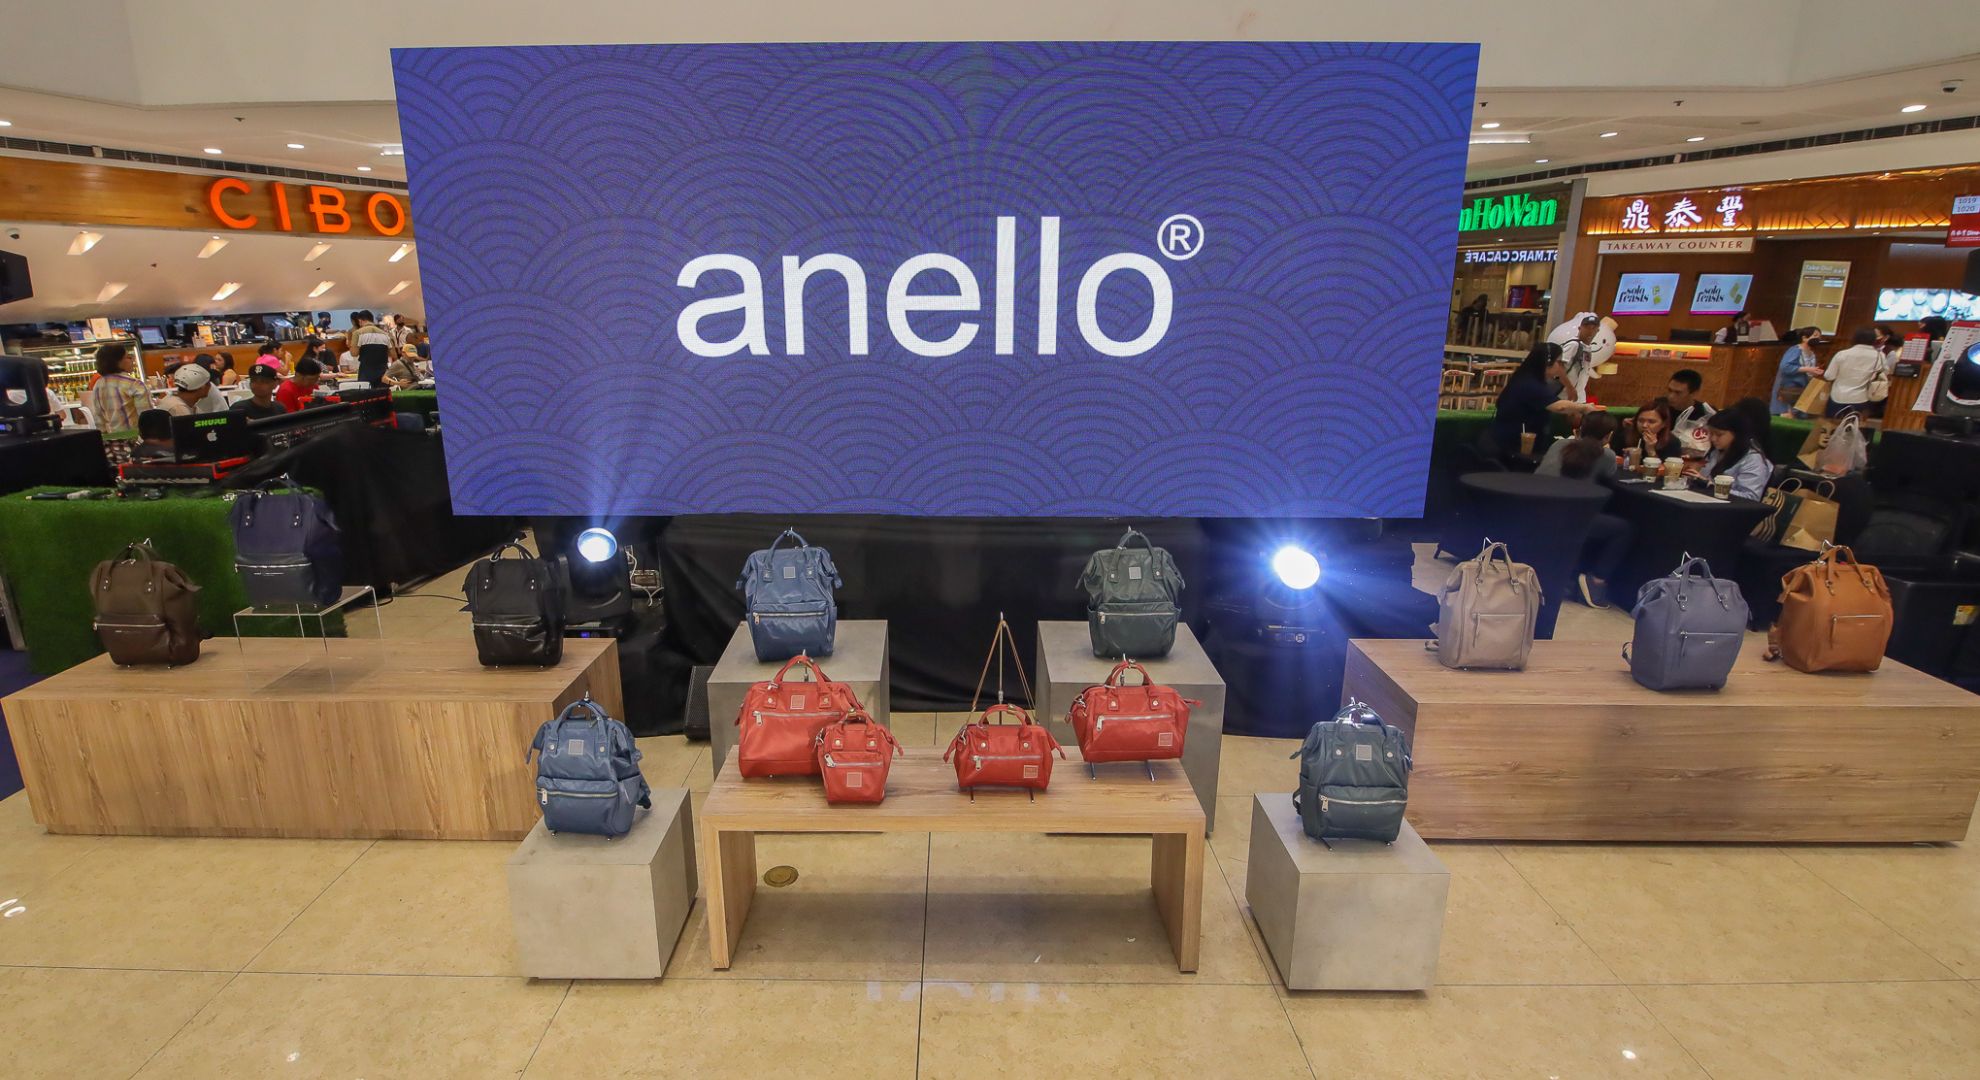 anello Philippines kicked off 'all about anello' 3-day event in SM Megamall